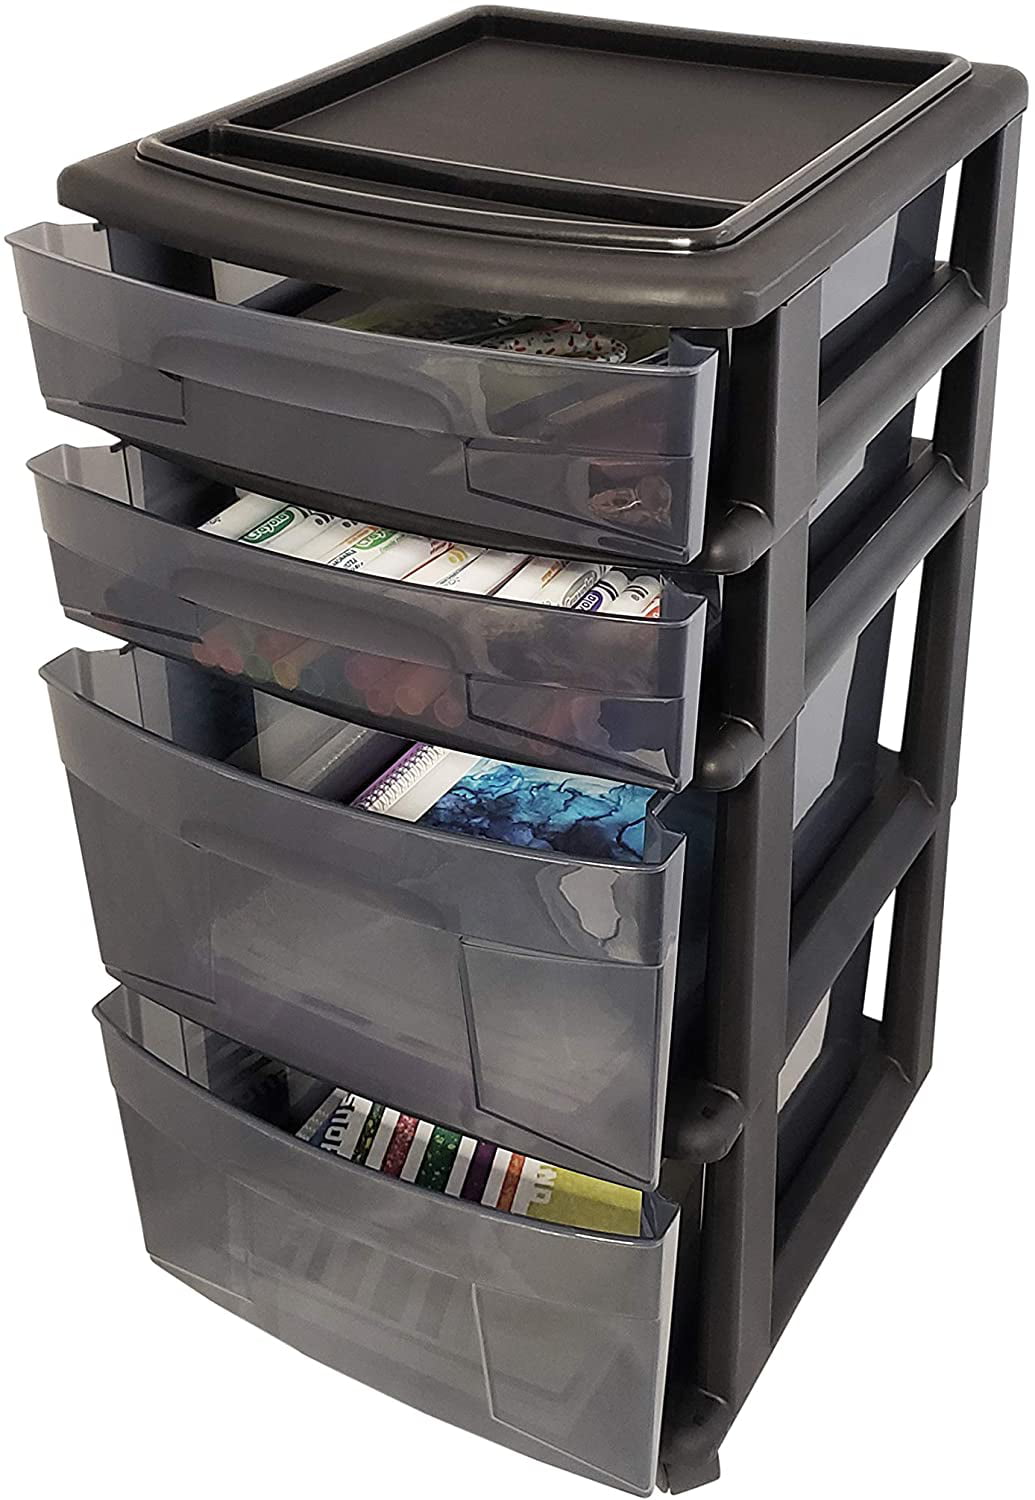 Casters Included Black Frame with Smoke Tint Drawers Plastic 4 Drawer Medium Cart 